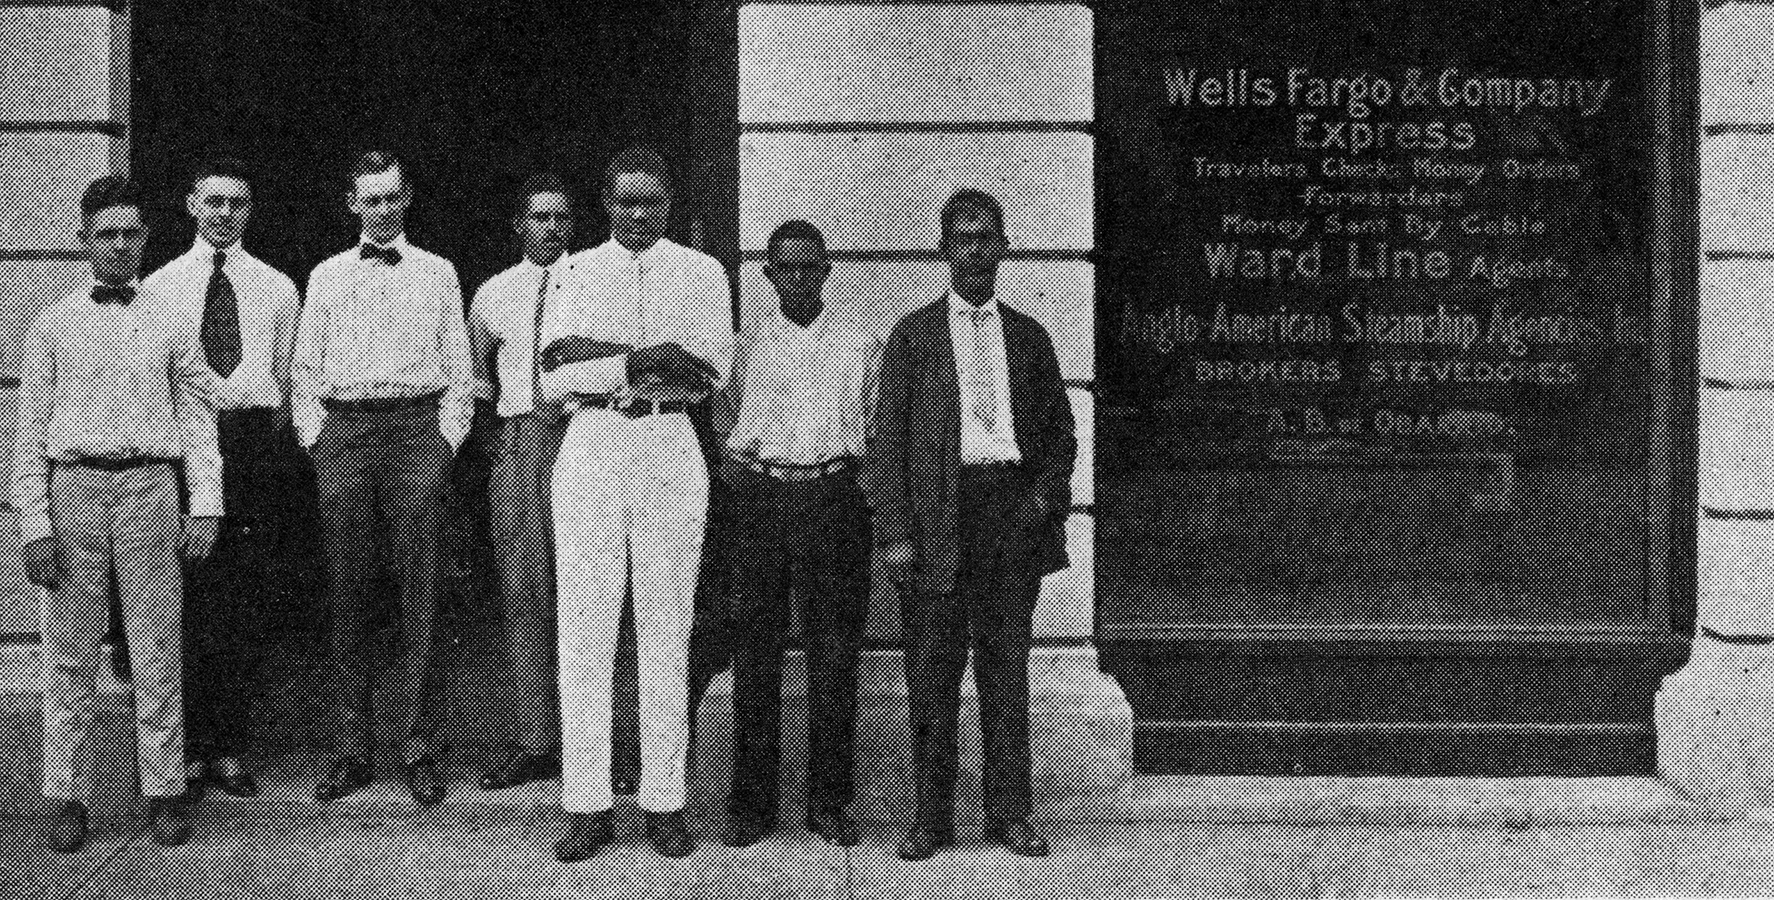 A black-and-white photo of seven men standing outside a building with Wells Fargo & Company Express on the window beside them. Image link will enlarge image.